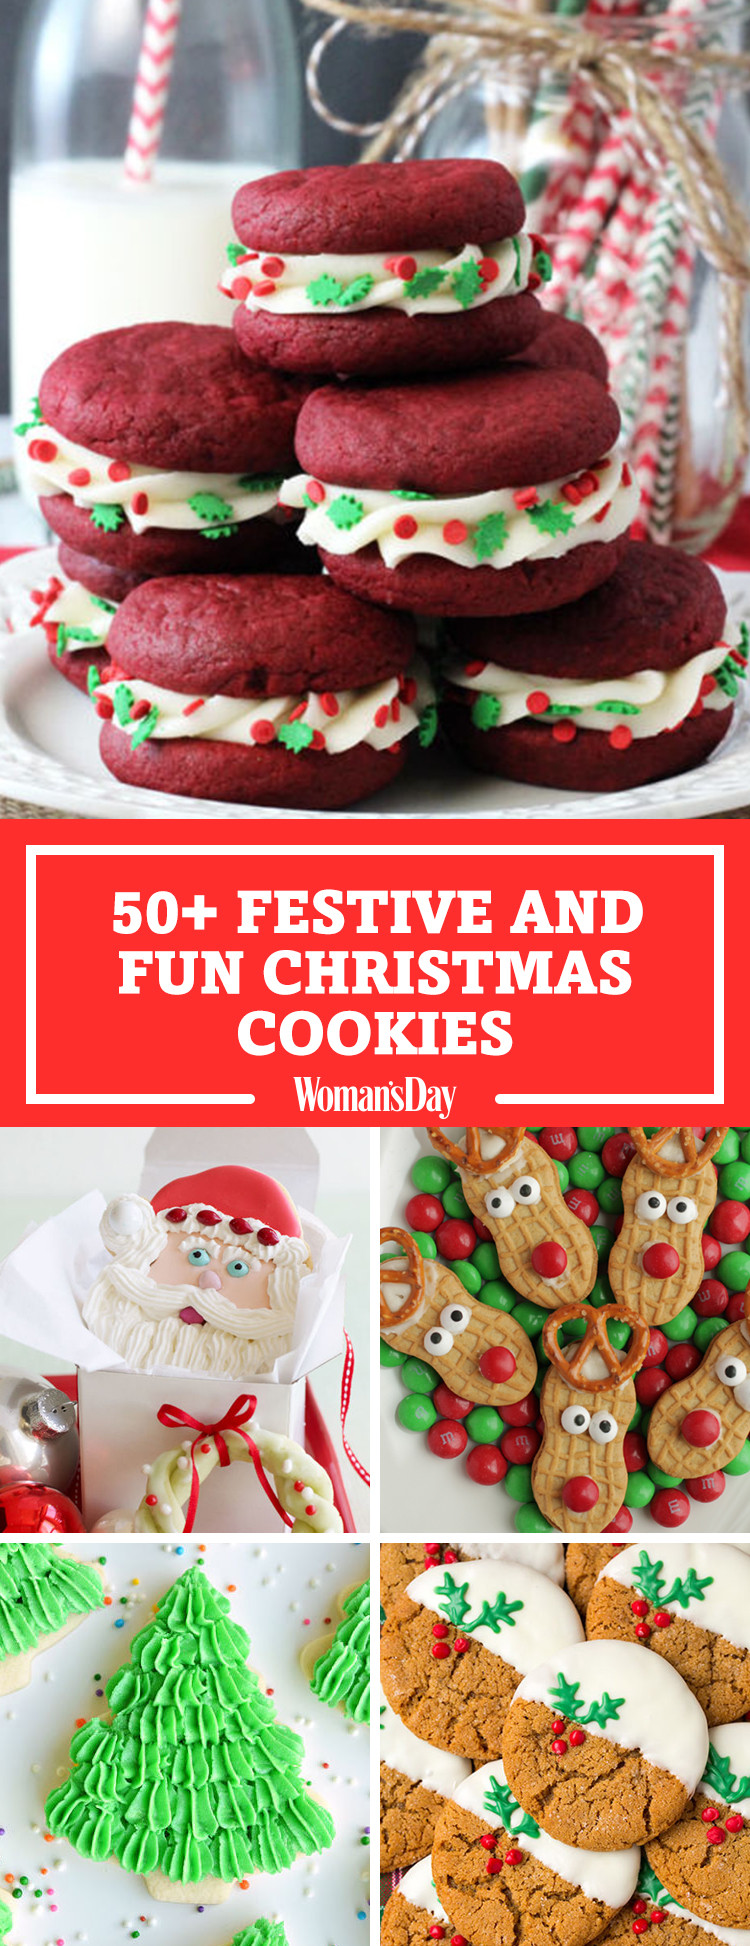 Fun Christmas Cookies
 59 Easy Christmas Cookies Best Recipes for Holiday